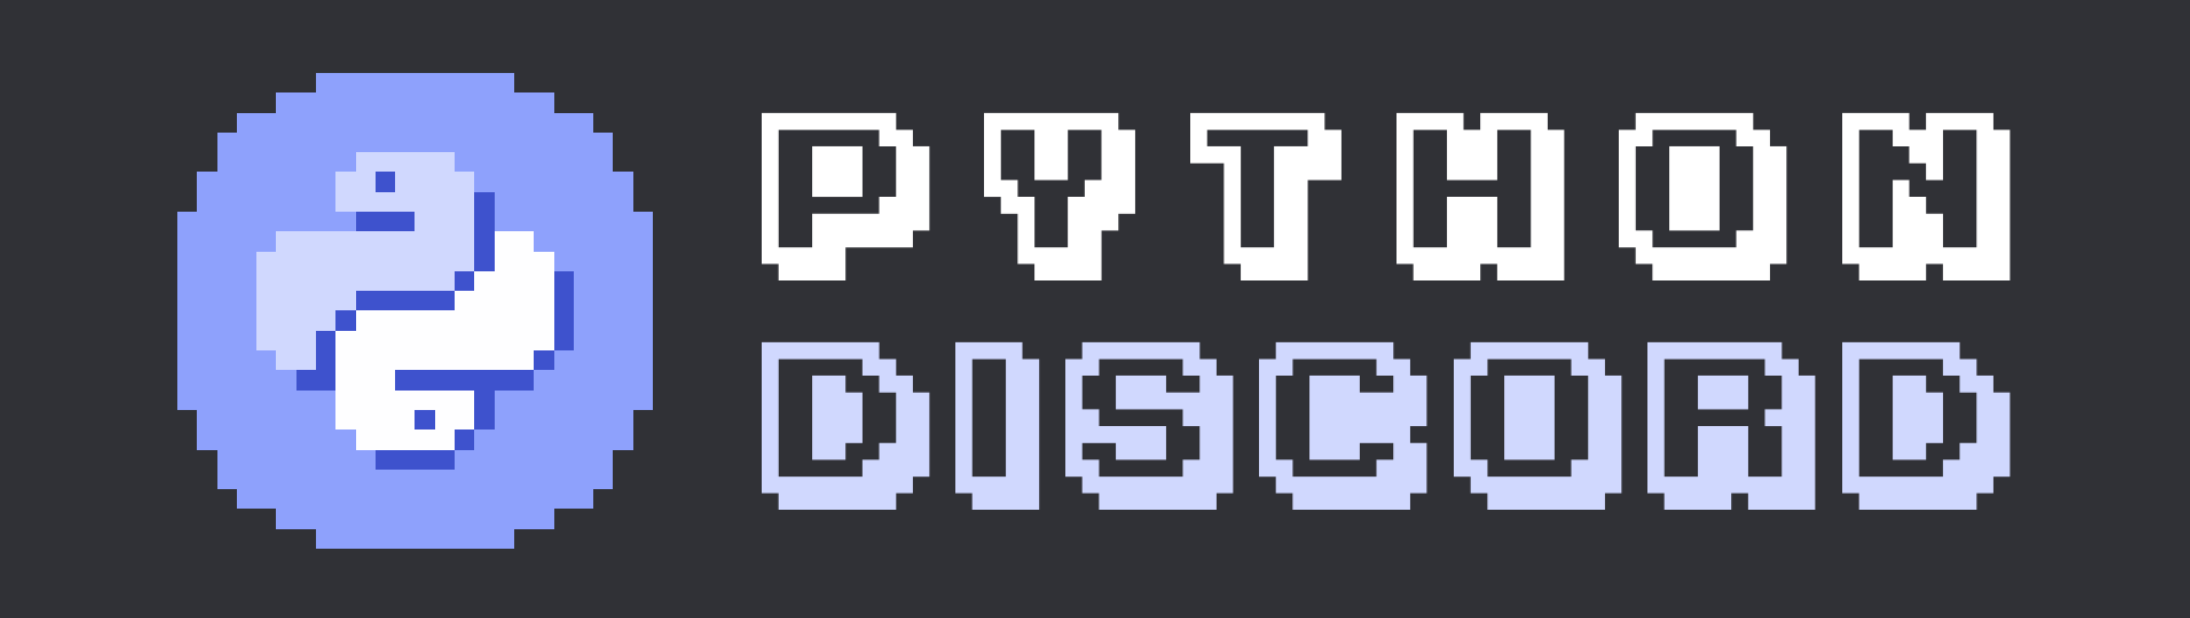 image from Python Discord Pixels: Summer 2021